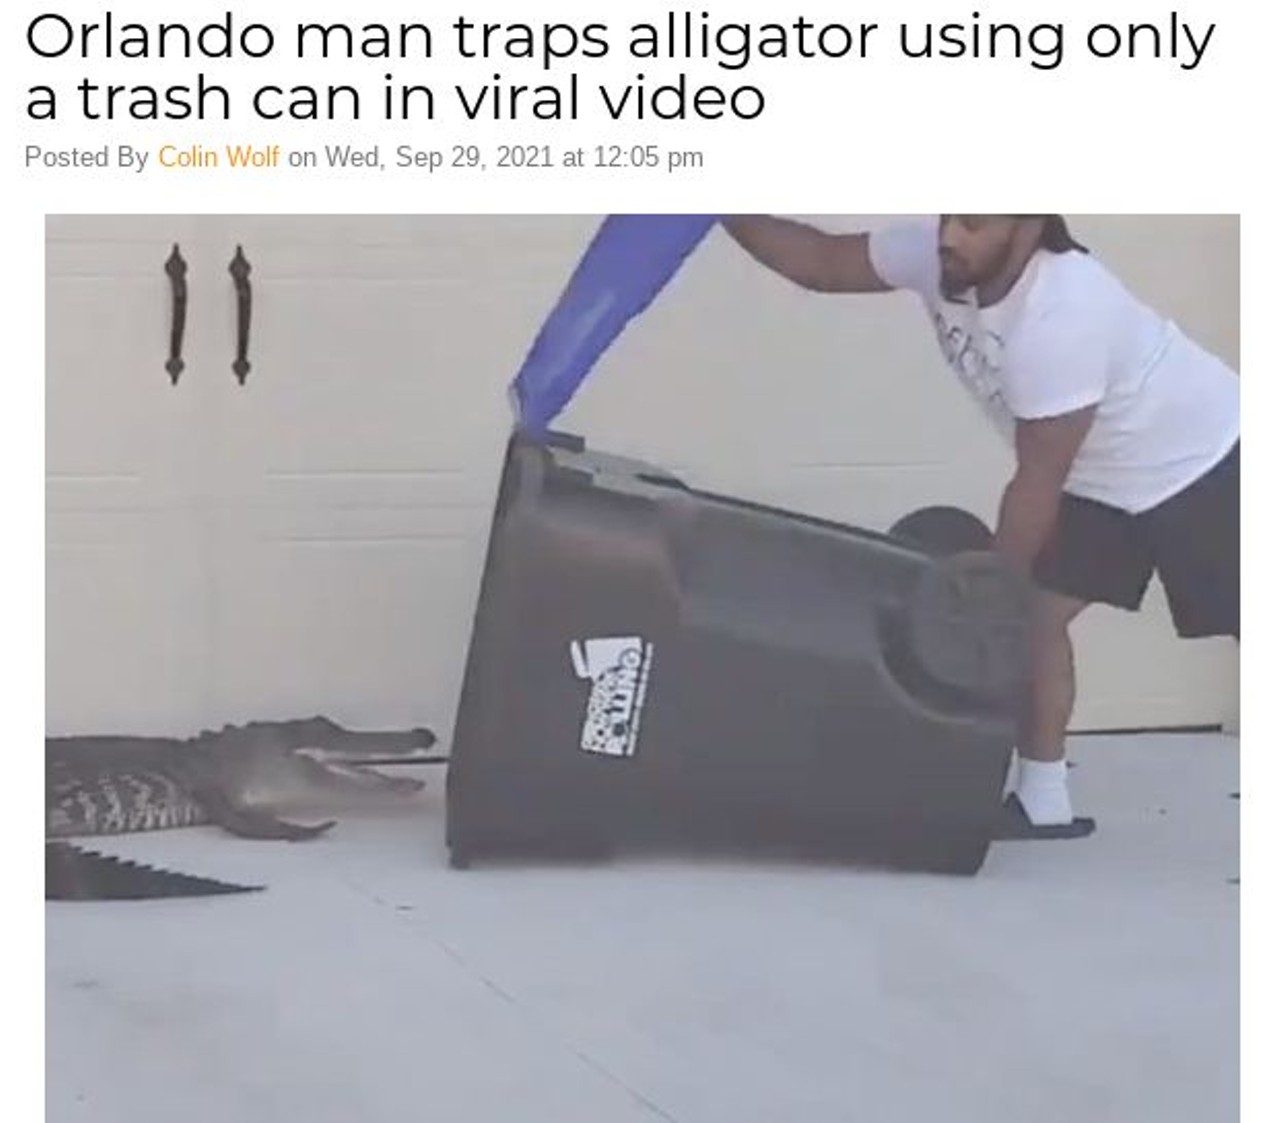 Florida Man traps alligator using only a trash can in viral video
